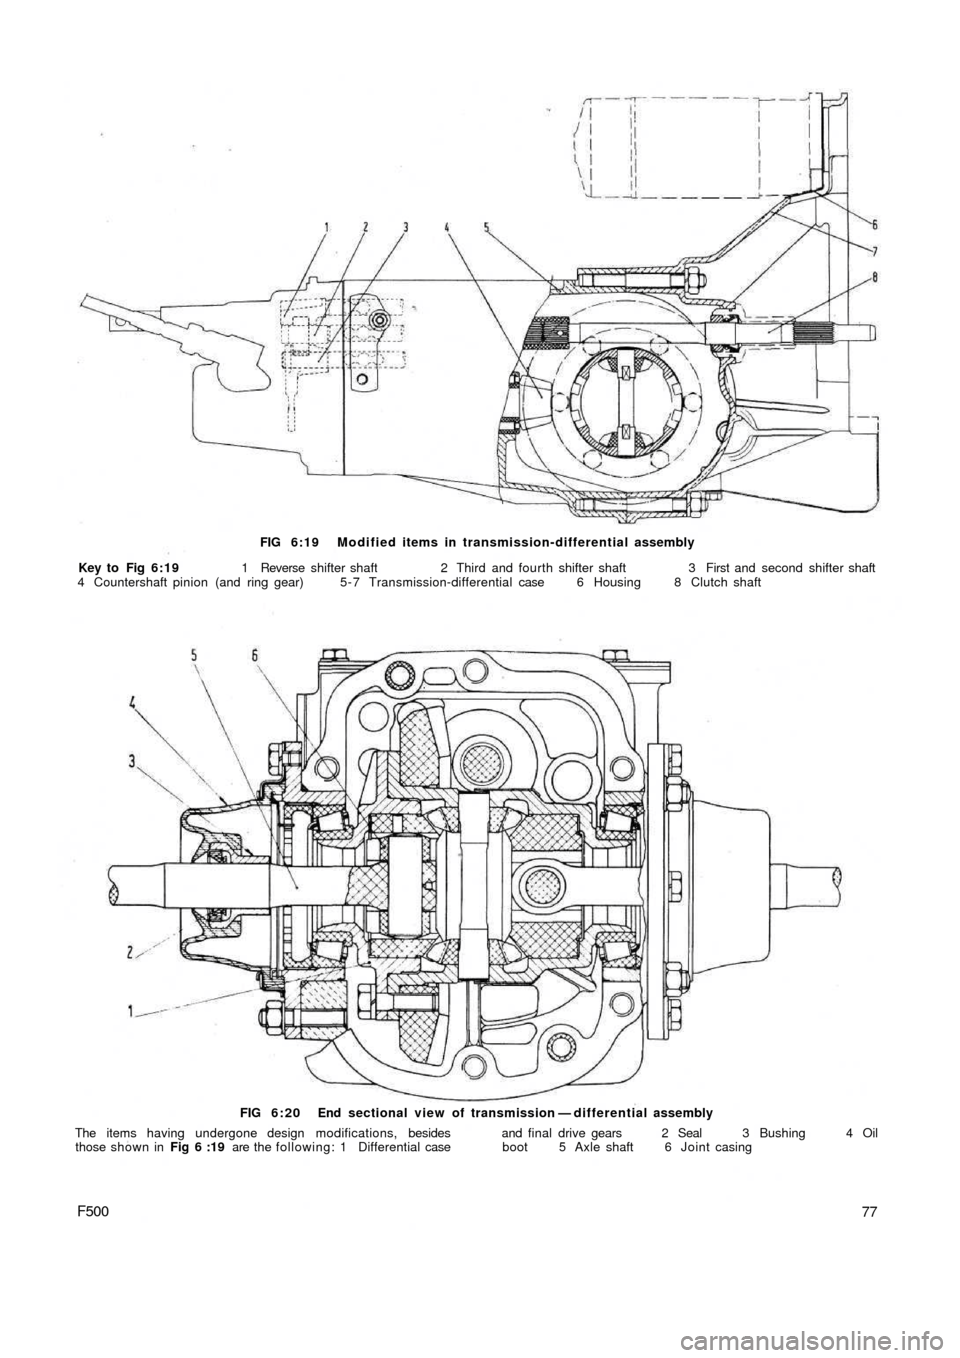 FIAT 500 1969 1.G Repair Manual FIG 6:19 Modified items in transmission-differential assembly
Key to  Fig  6:19 1 Reverse shifter shaft  2 Third and fourth shifter shaft  3 First and second shifter shaft
4 Countershaft pinion (and r